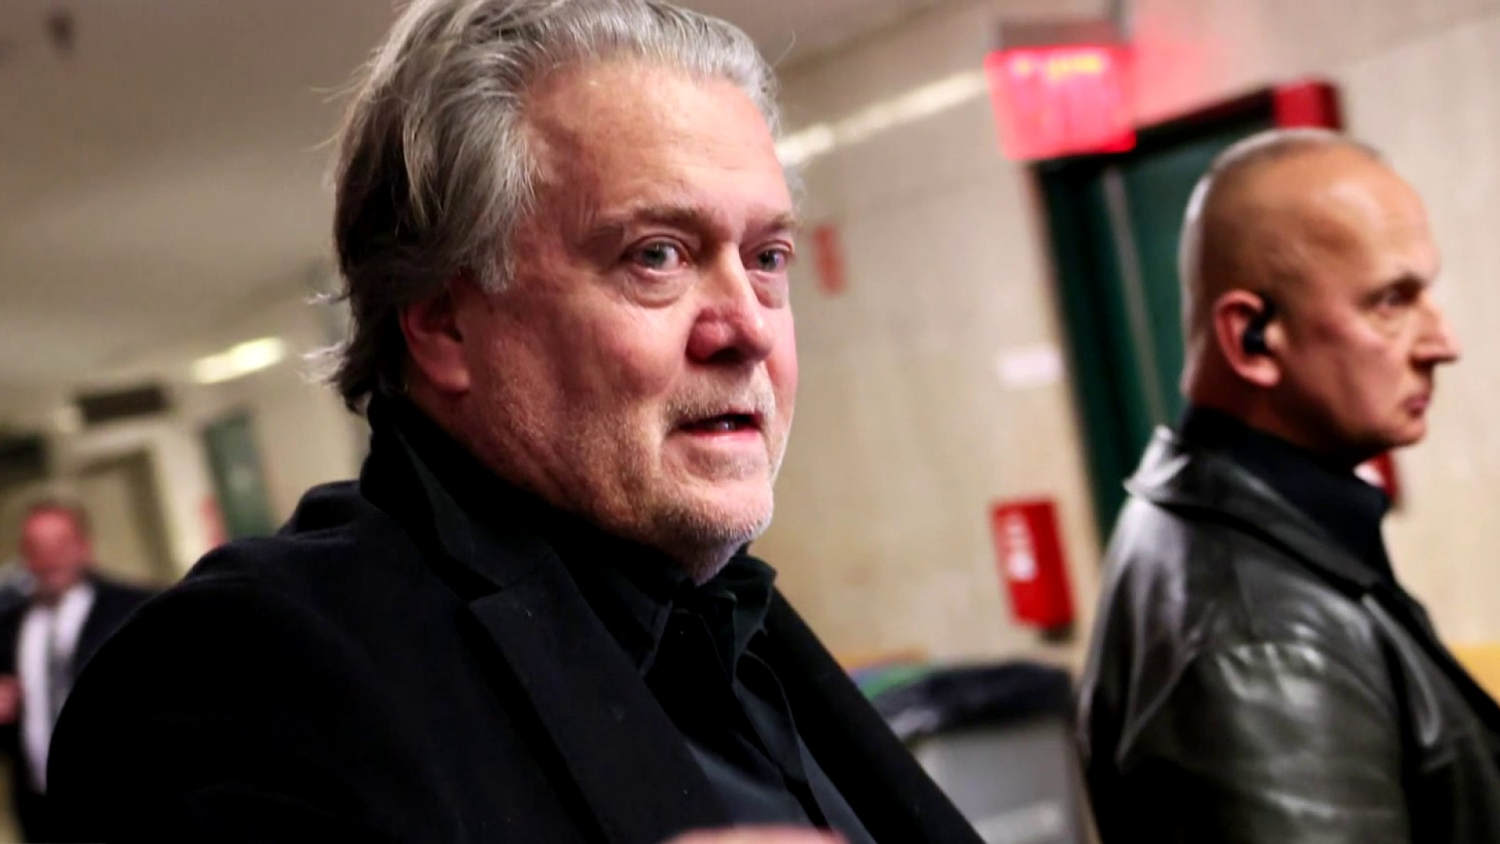 Steve Bannon ordered to report to prison by July 1 for contempt of Congress sentence